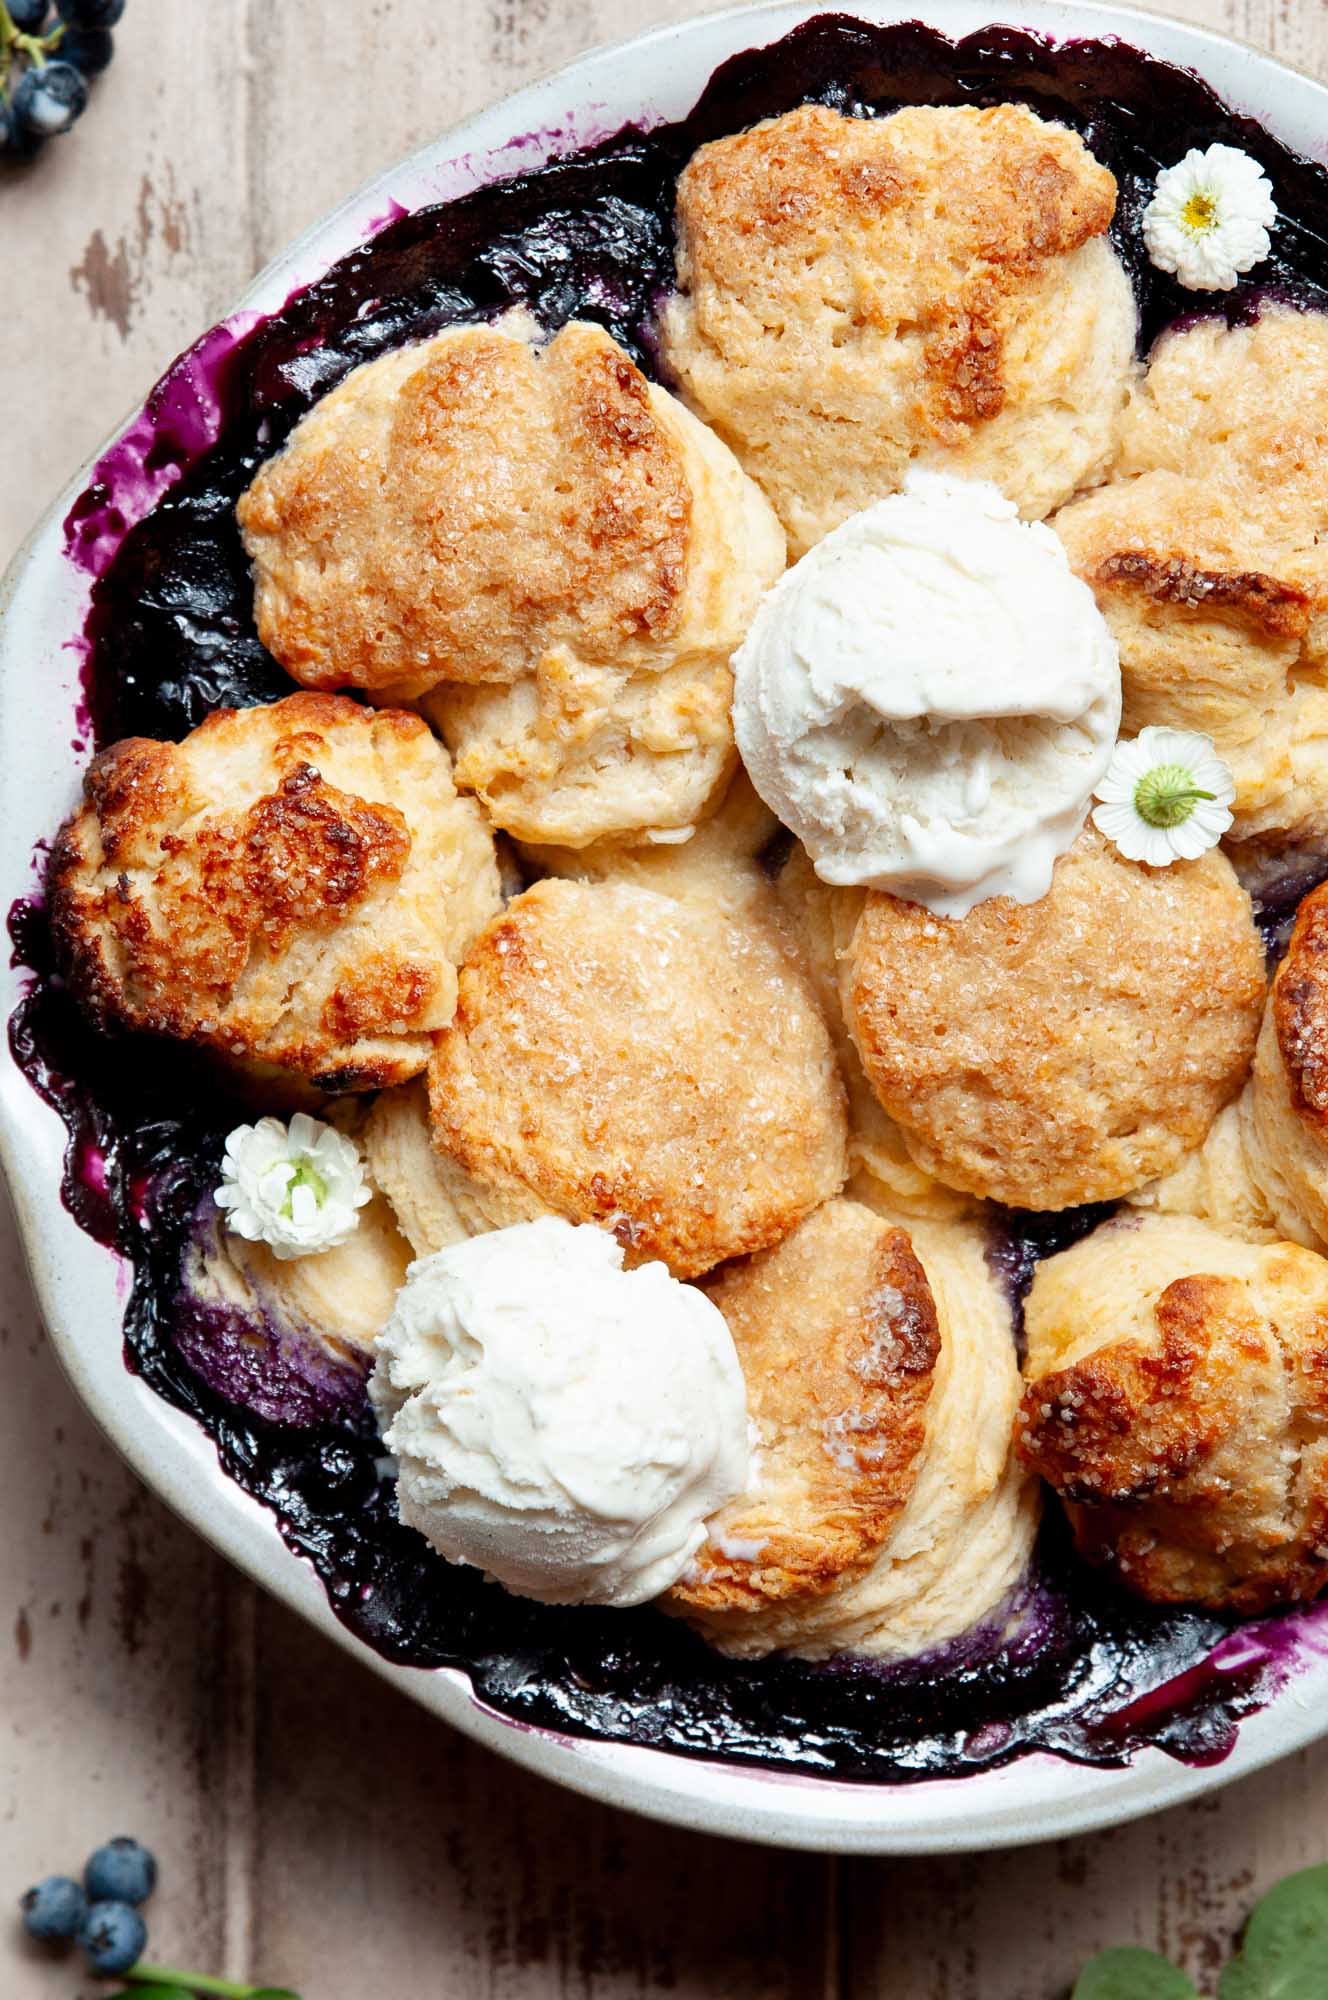 Blueberry Cobbler with Cream Cheese Biscuits